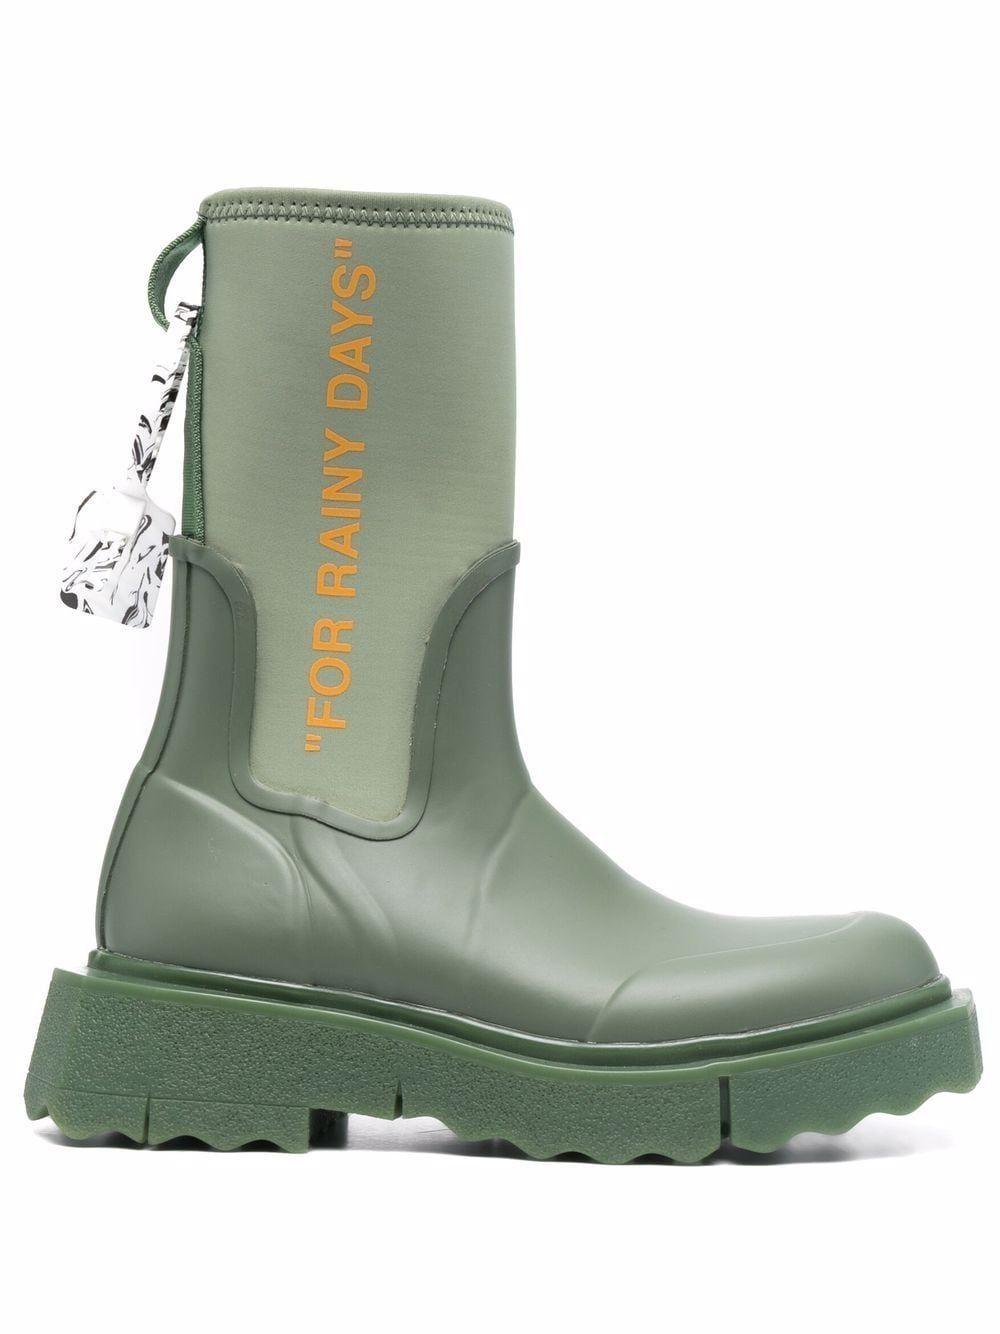 Off-White c/o Virgil Abloh Rubber Zip-tie Rain Boots in Green | Lyst